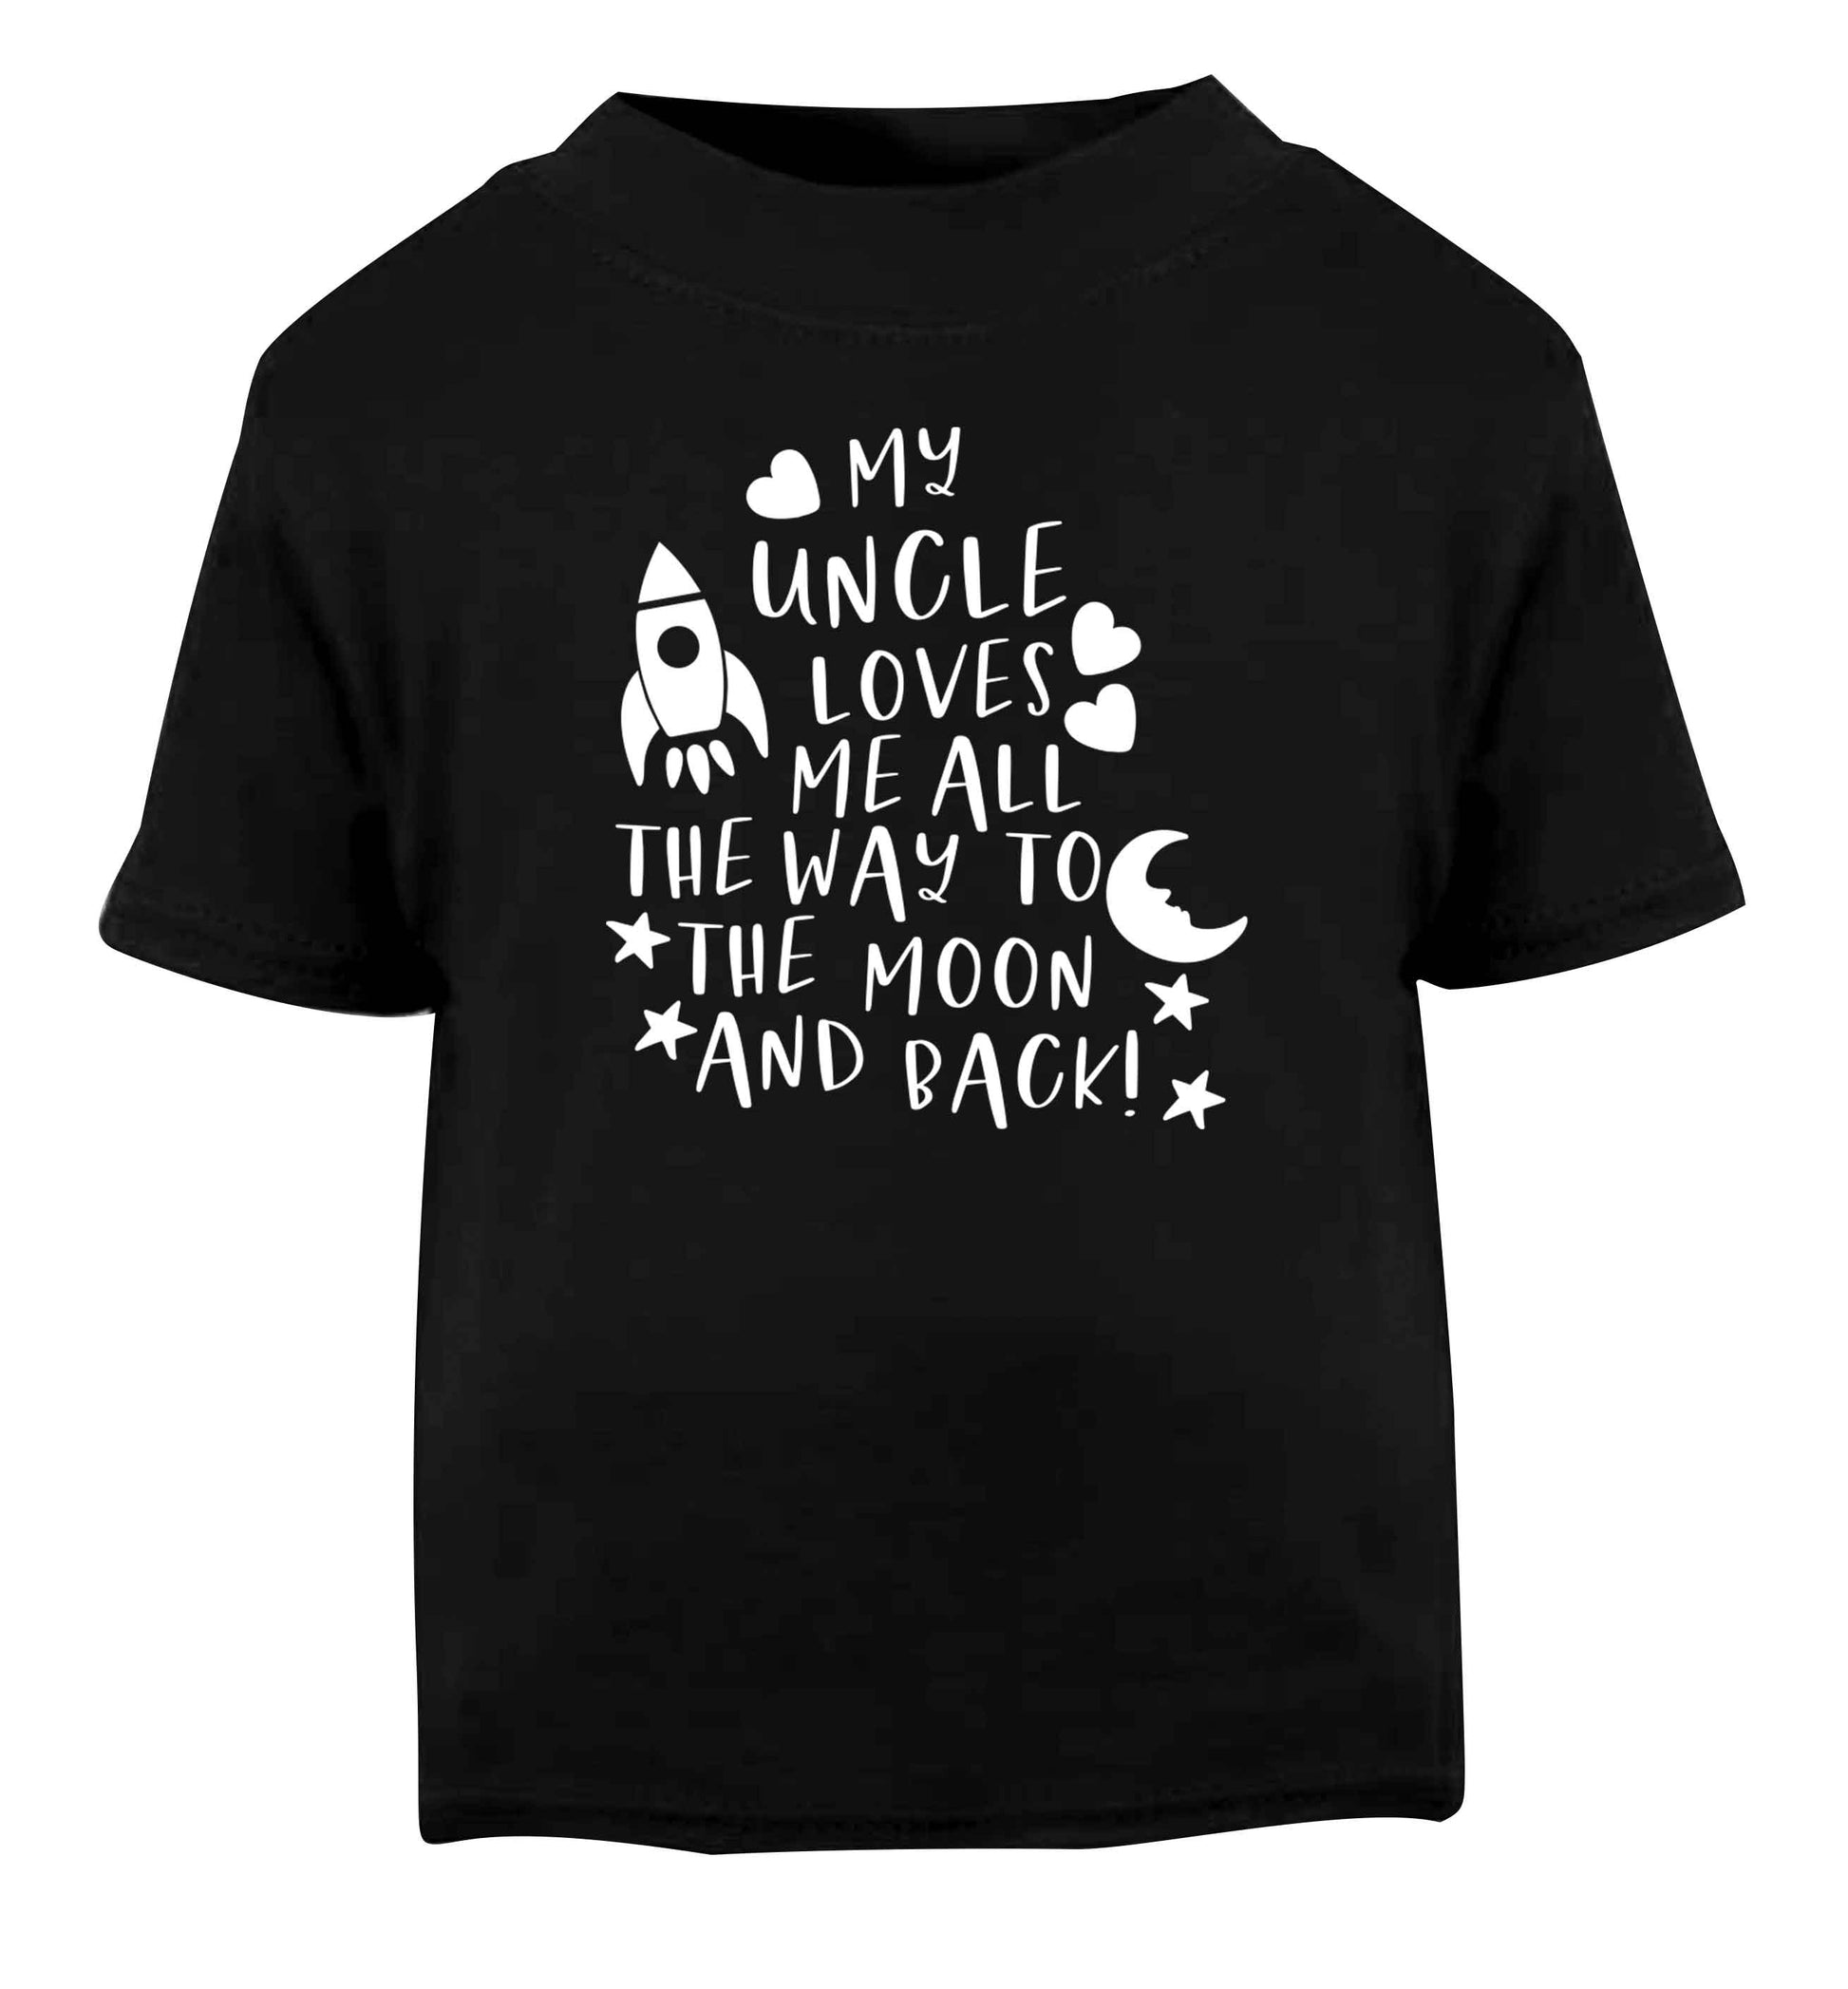 My uncle loves me all the way to the moon and back Black Baby Toddler Tshirt 2 years